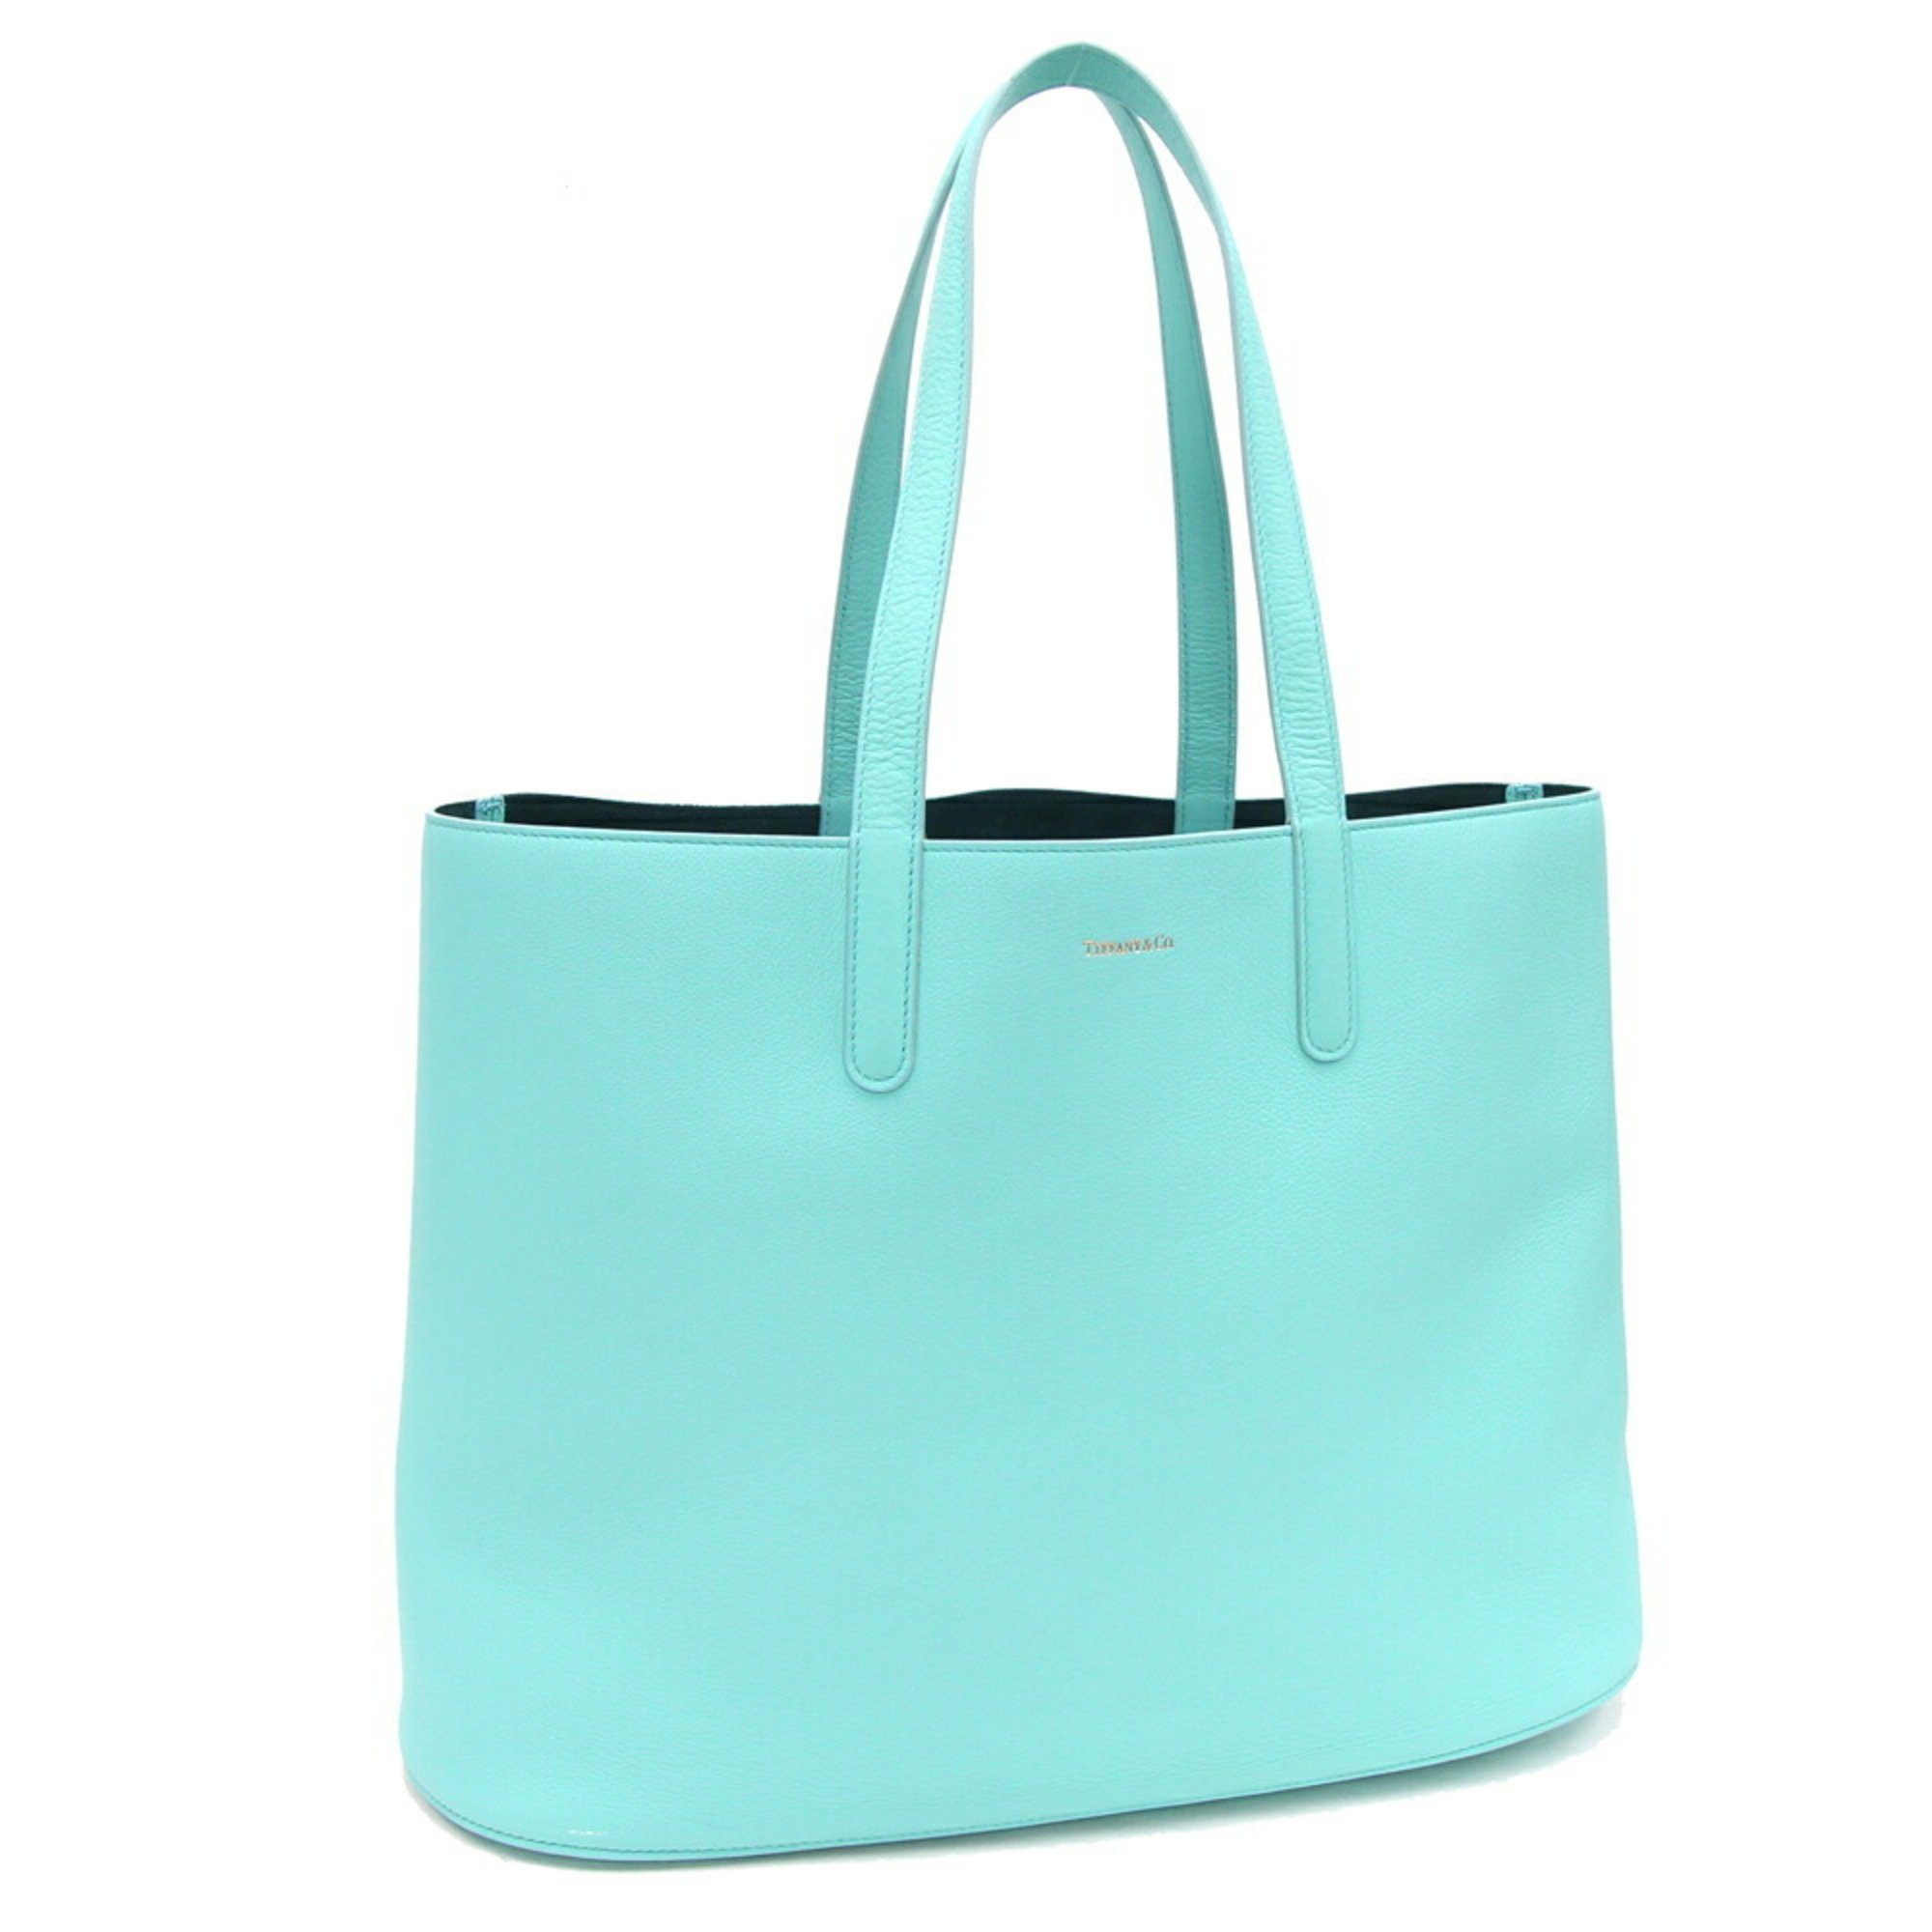 Tiffany Tote Bag Blue Leather Shoulder for Women TIFFANY&Co.